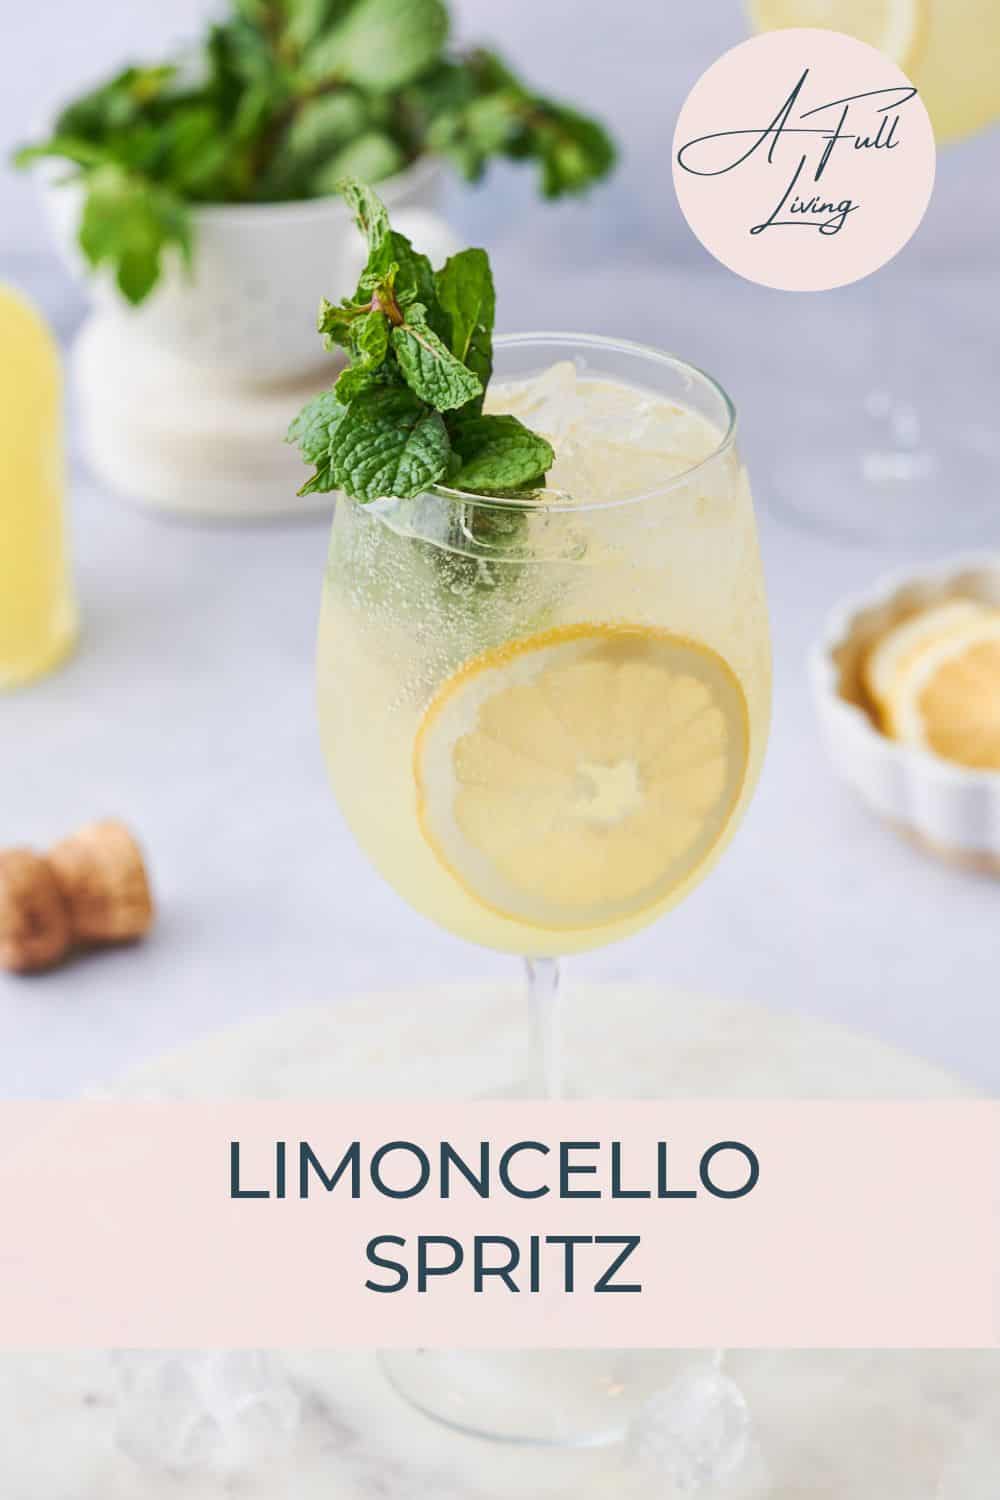 Limoncello Spritz surrounding by limoncello, lemons, another cocktail, and garnished with mint.